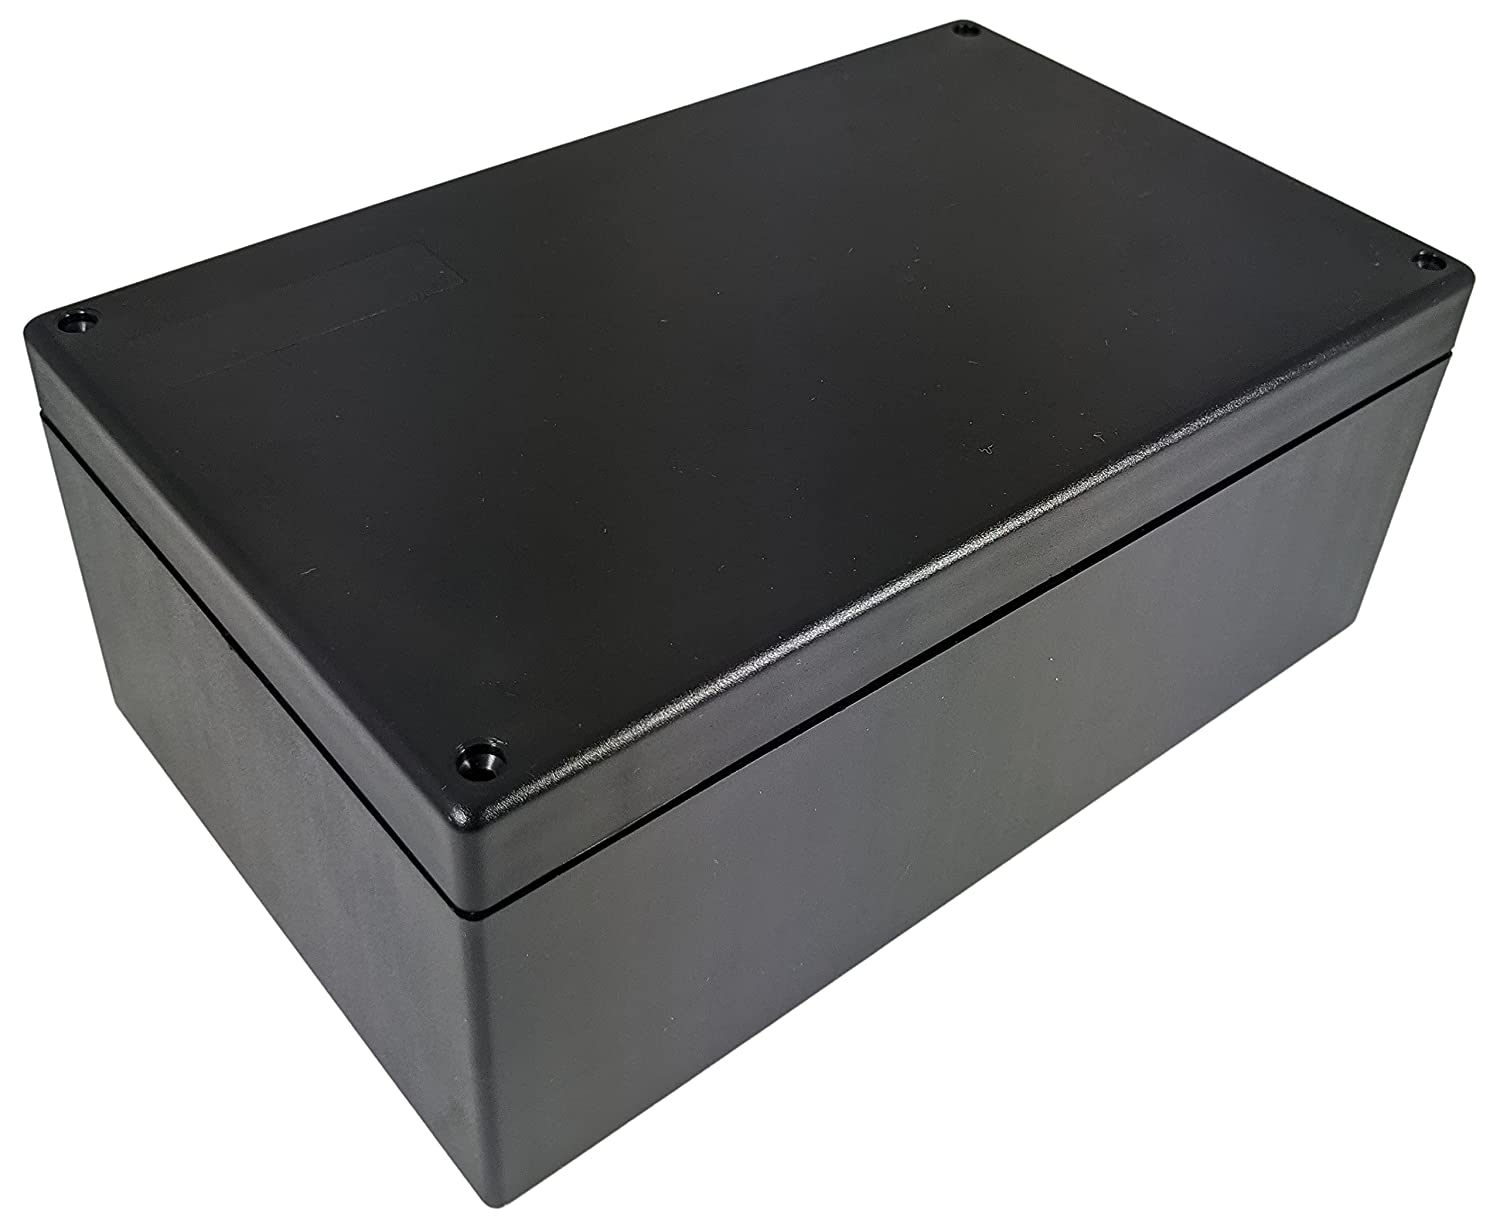 Black ABS Plastic Enclosure Project Box with Lid and Screws, 8.82